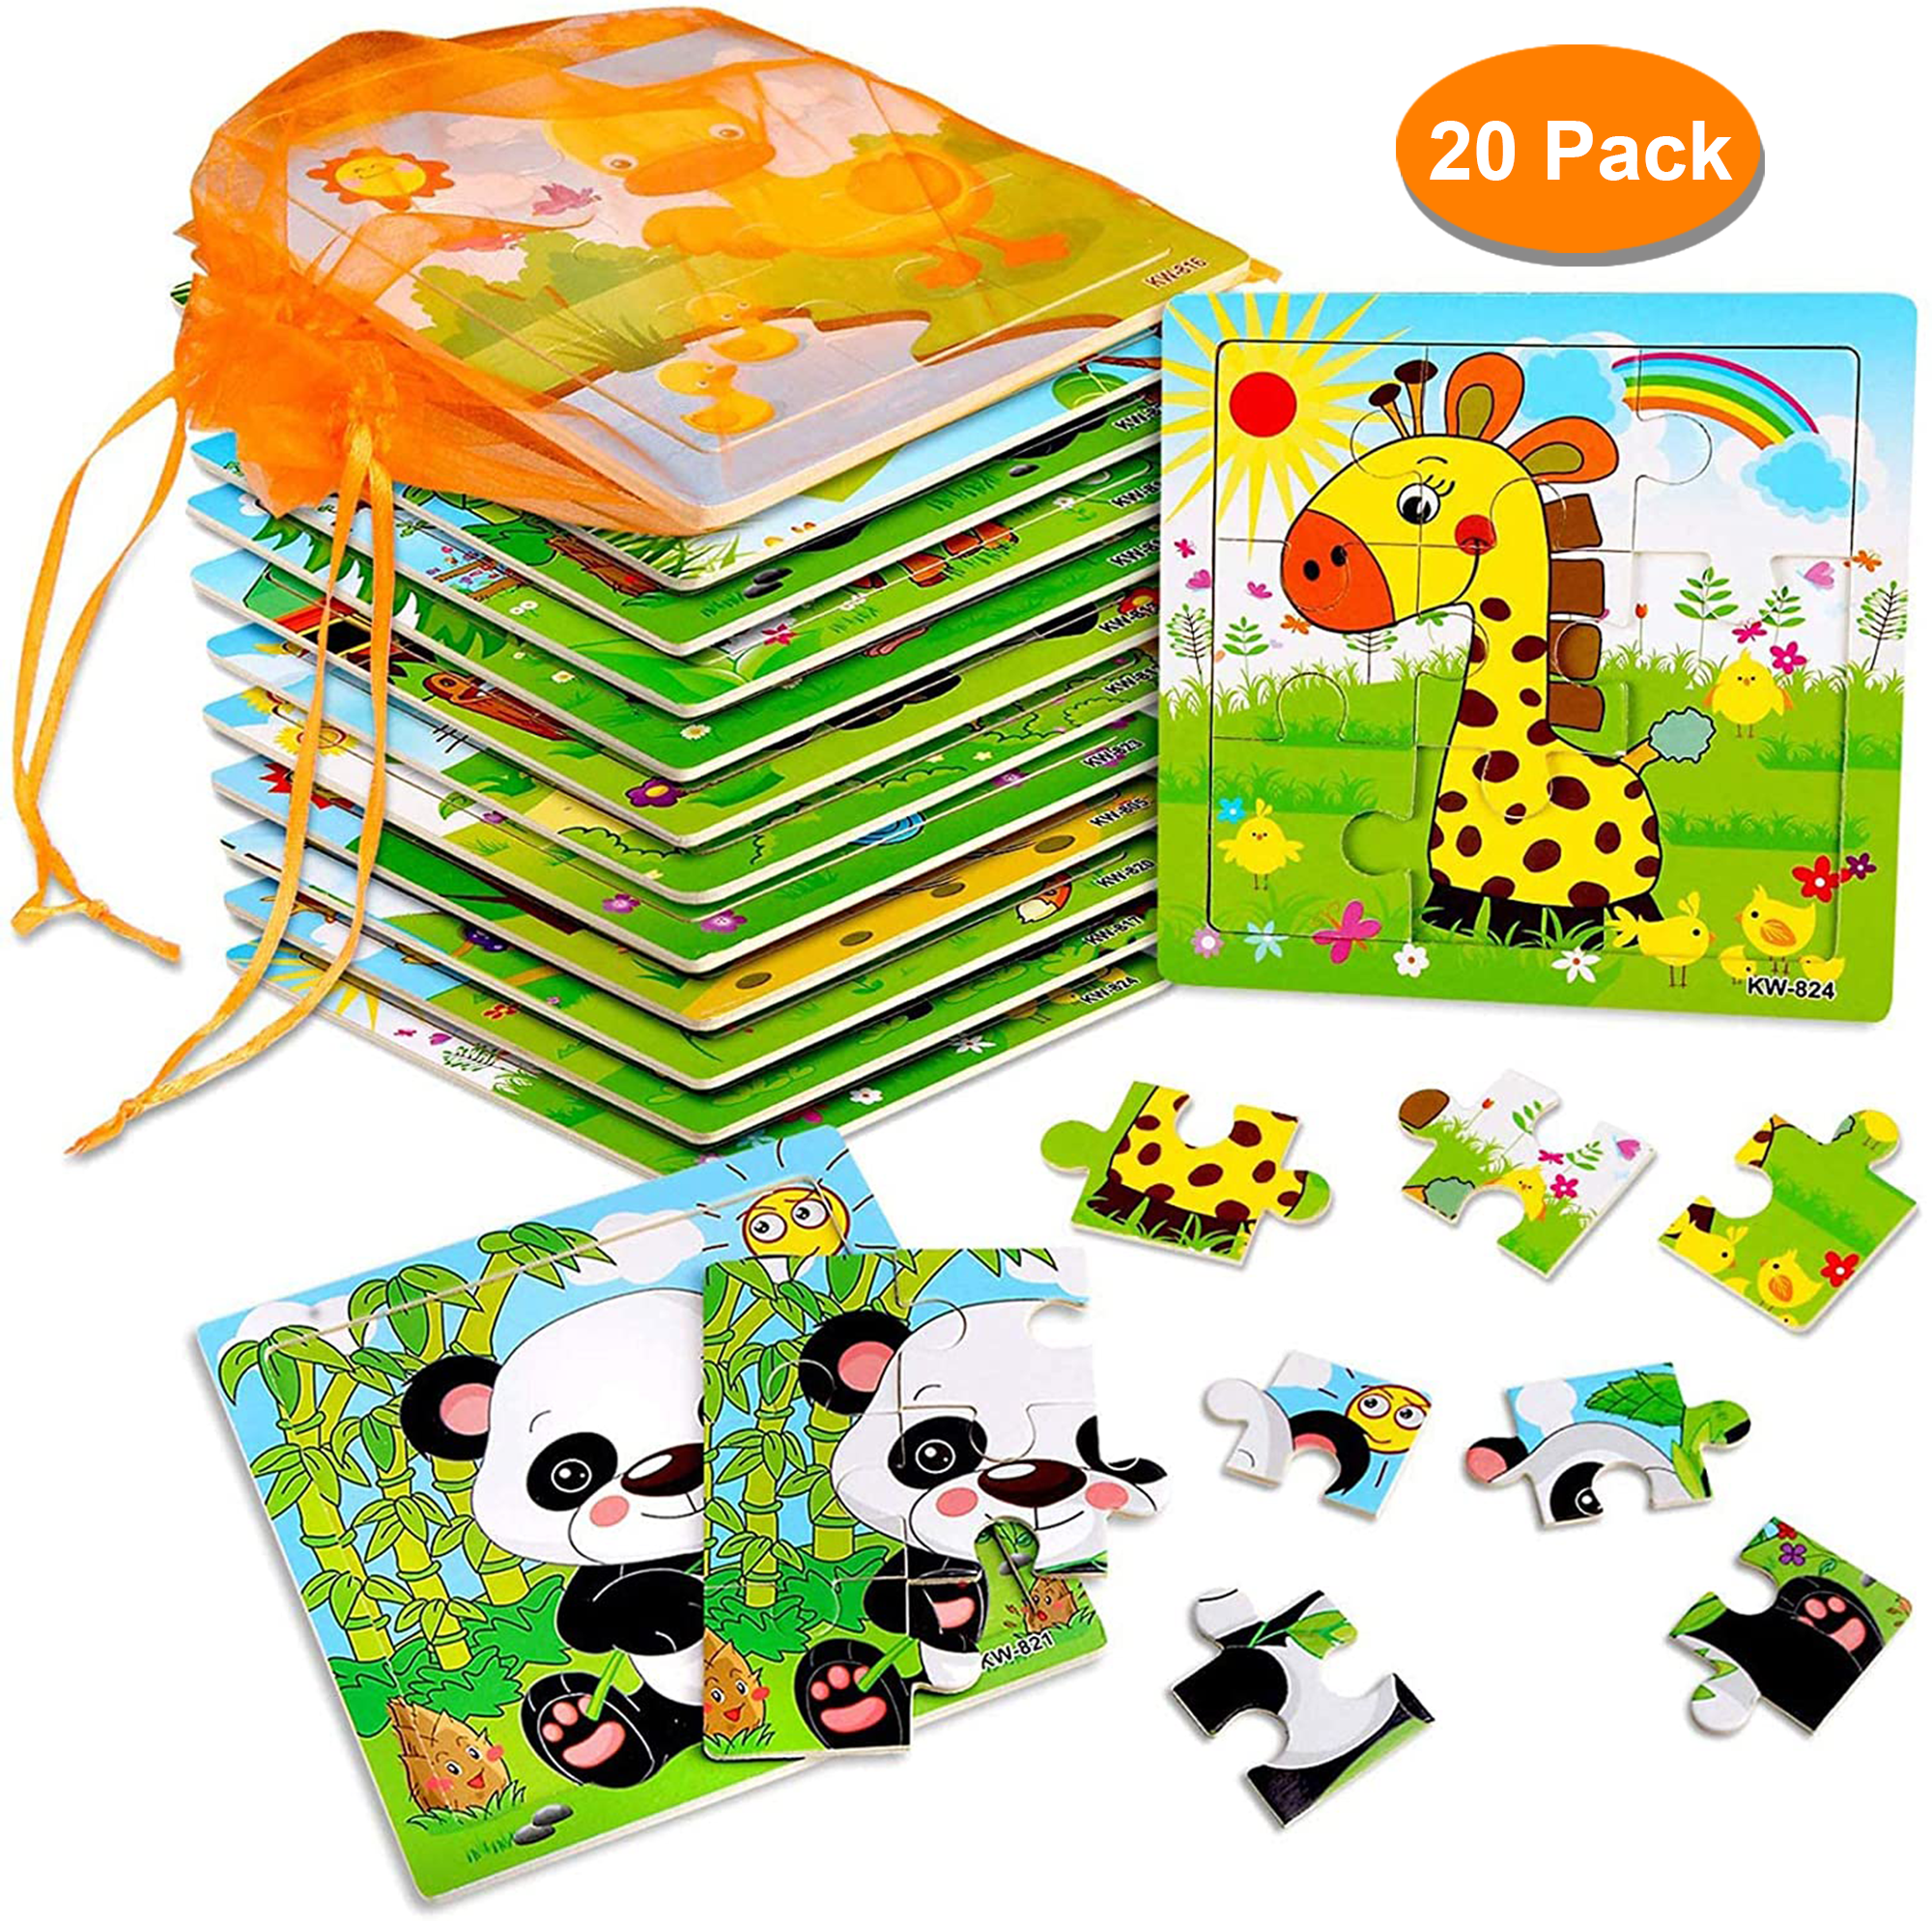 Details about   CTG BRAND YOUNG CHILD'S WOODEN PUZZLES 6-7 PCS PUZZLES 5" X 10" SIZE 11327 F/S 